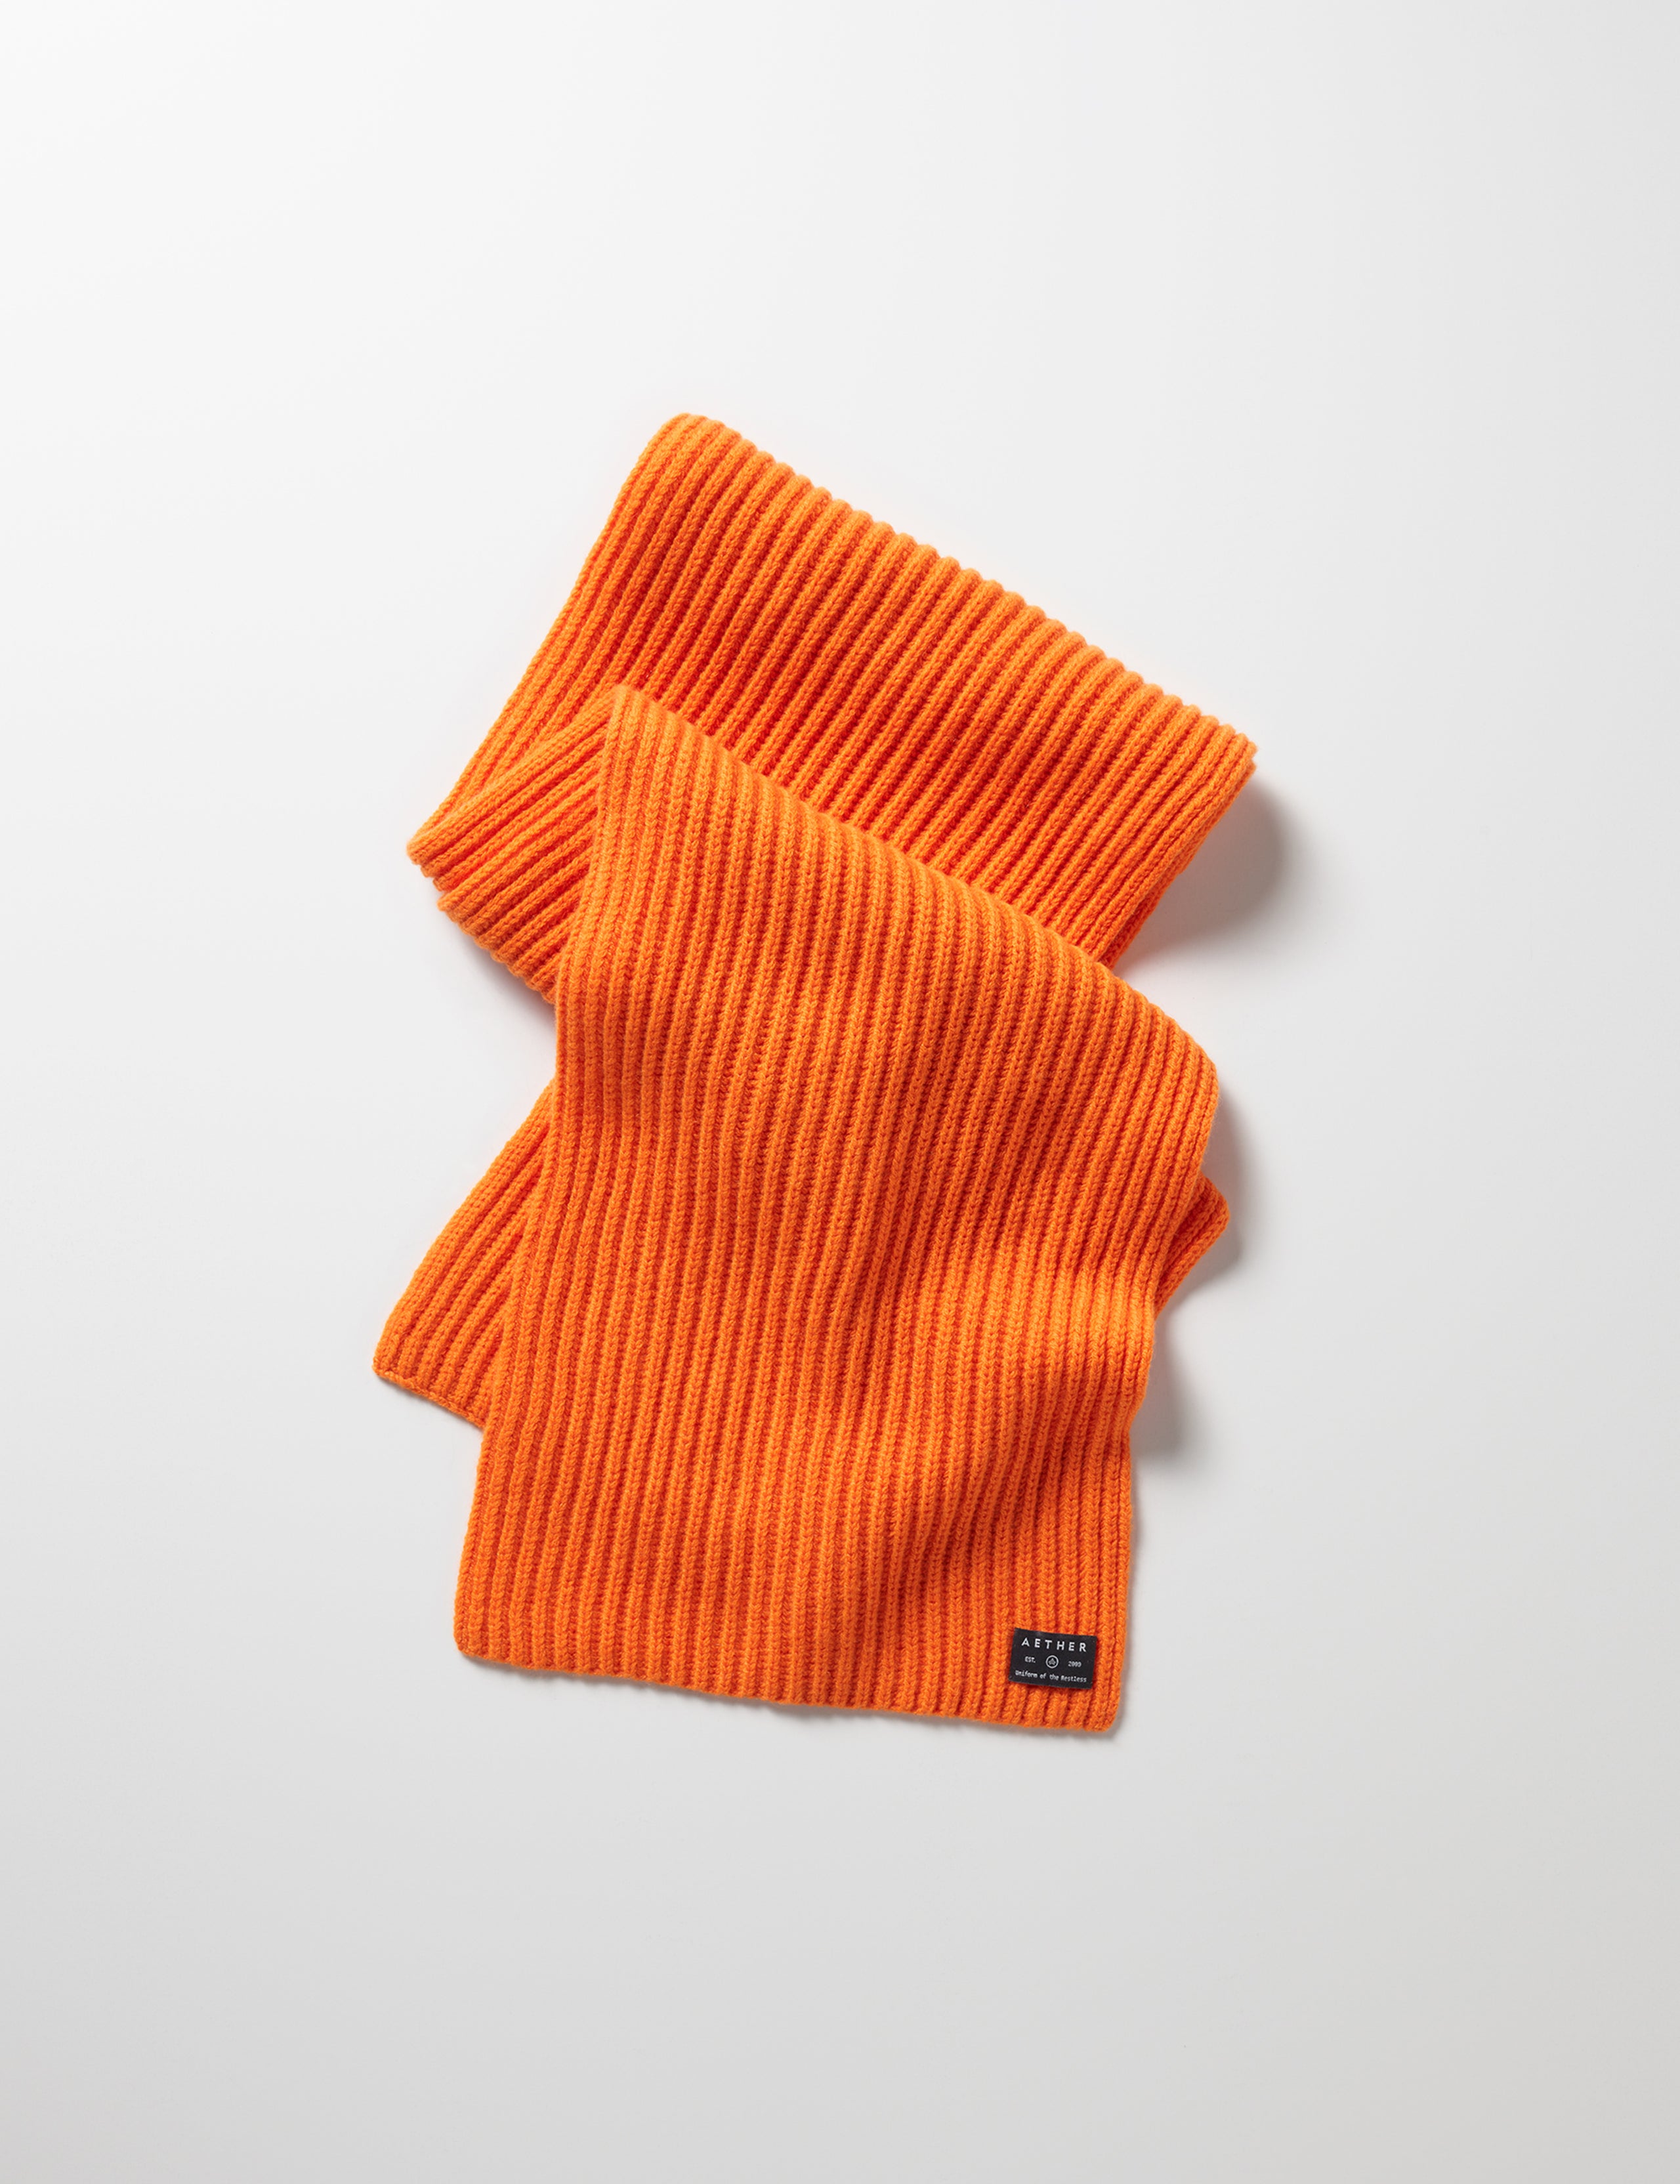 orange cashmere scarf from AETHER Apparel